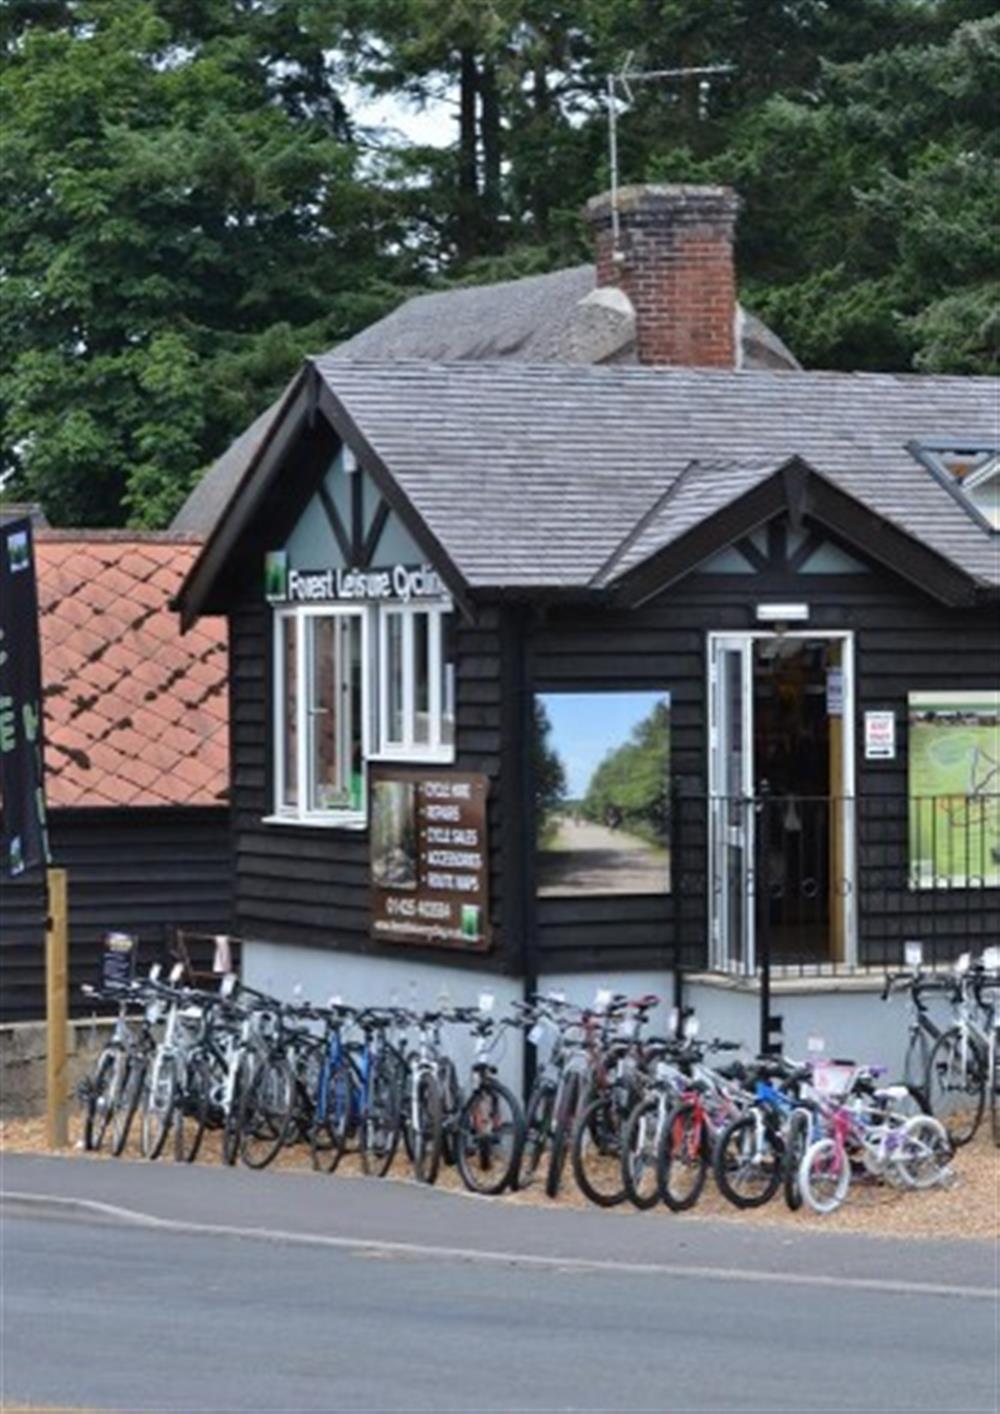 Burley cycle hire at Dial Cottage in Bransgore